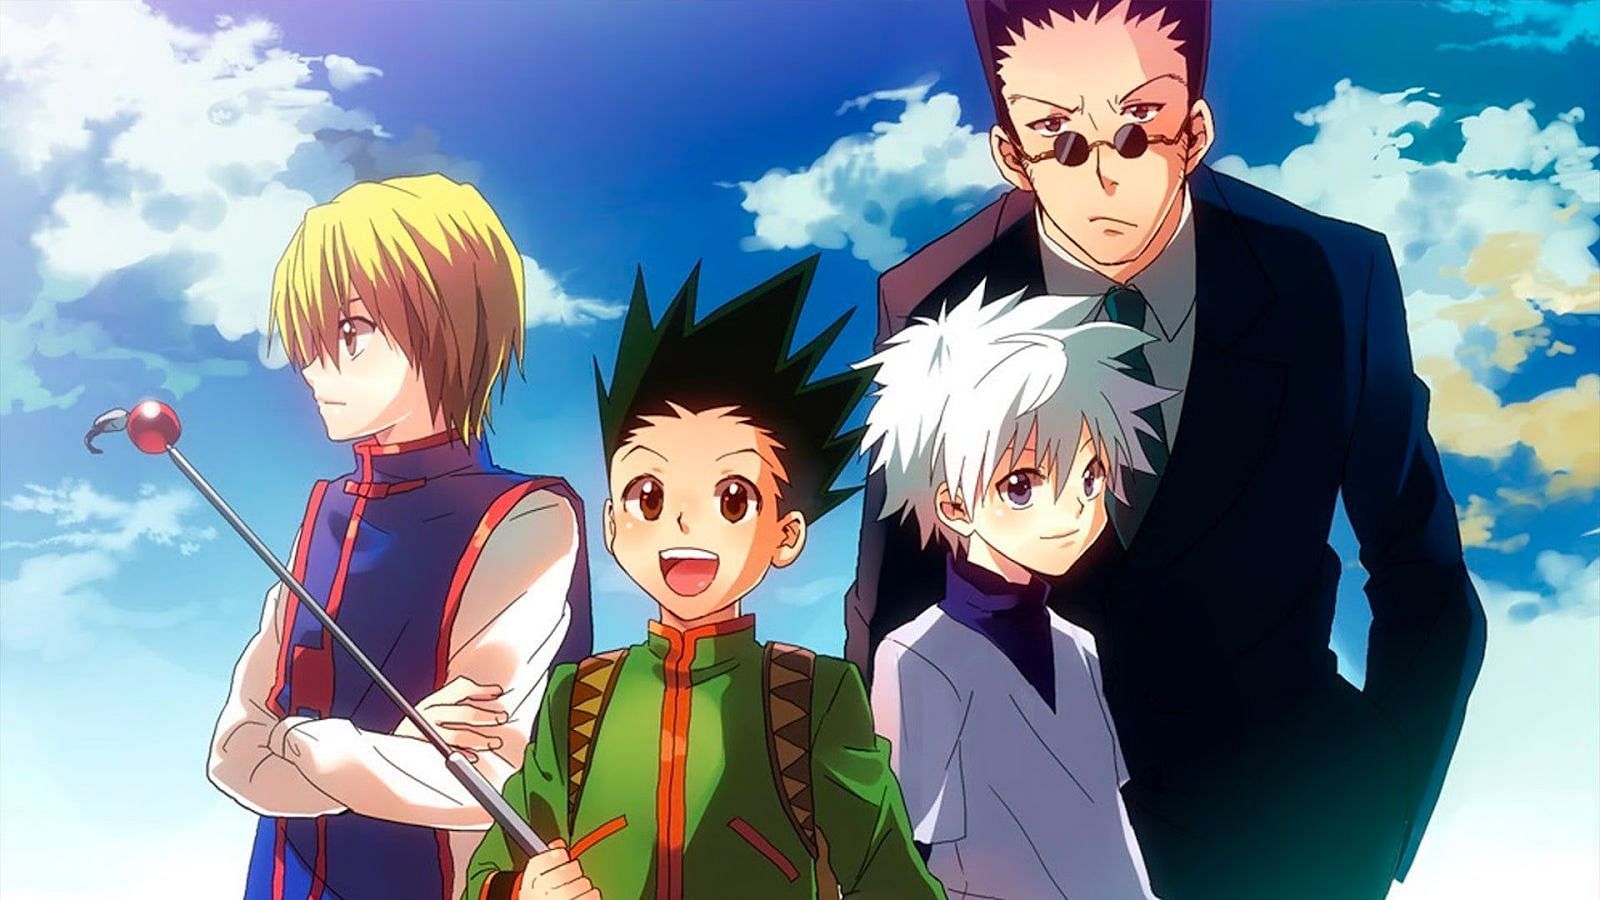 How many seasons of Hunter x Hunter are there?